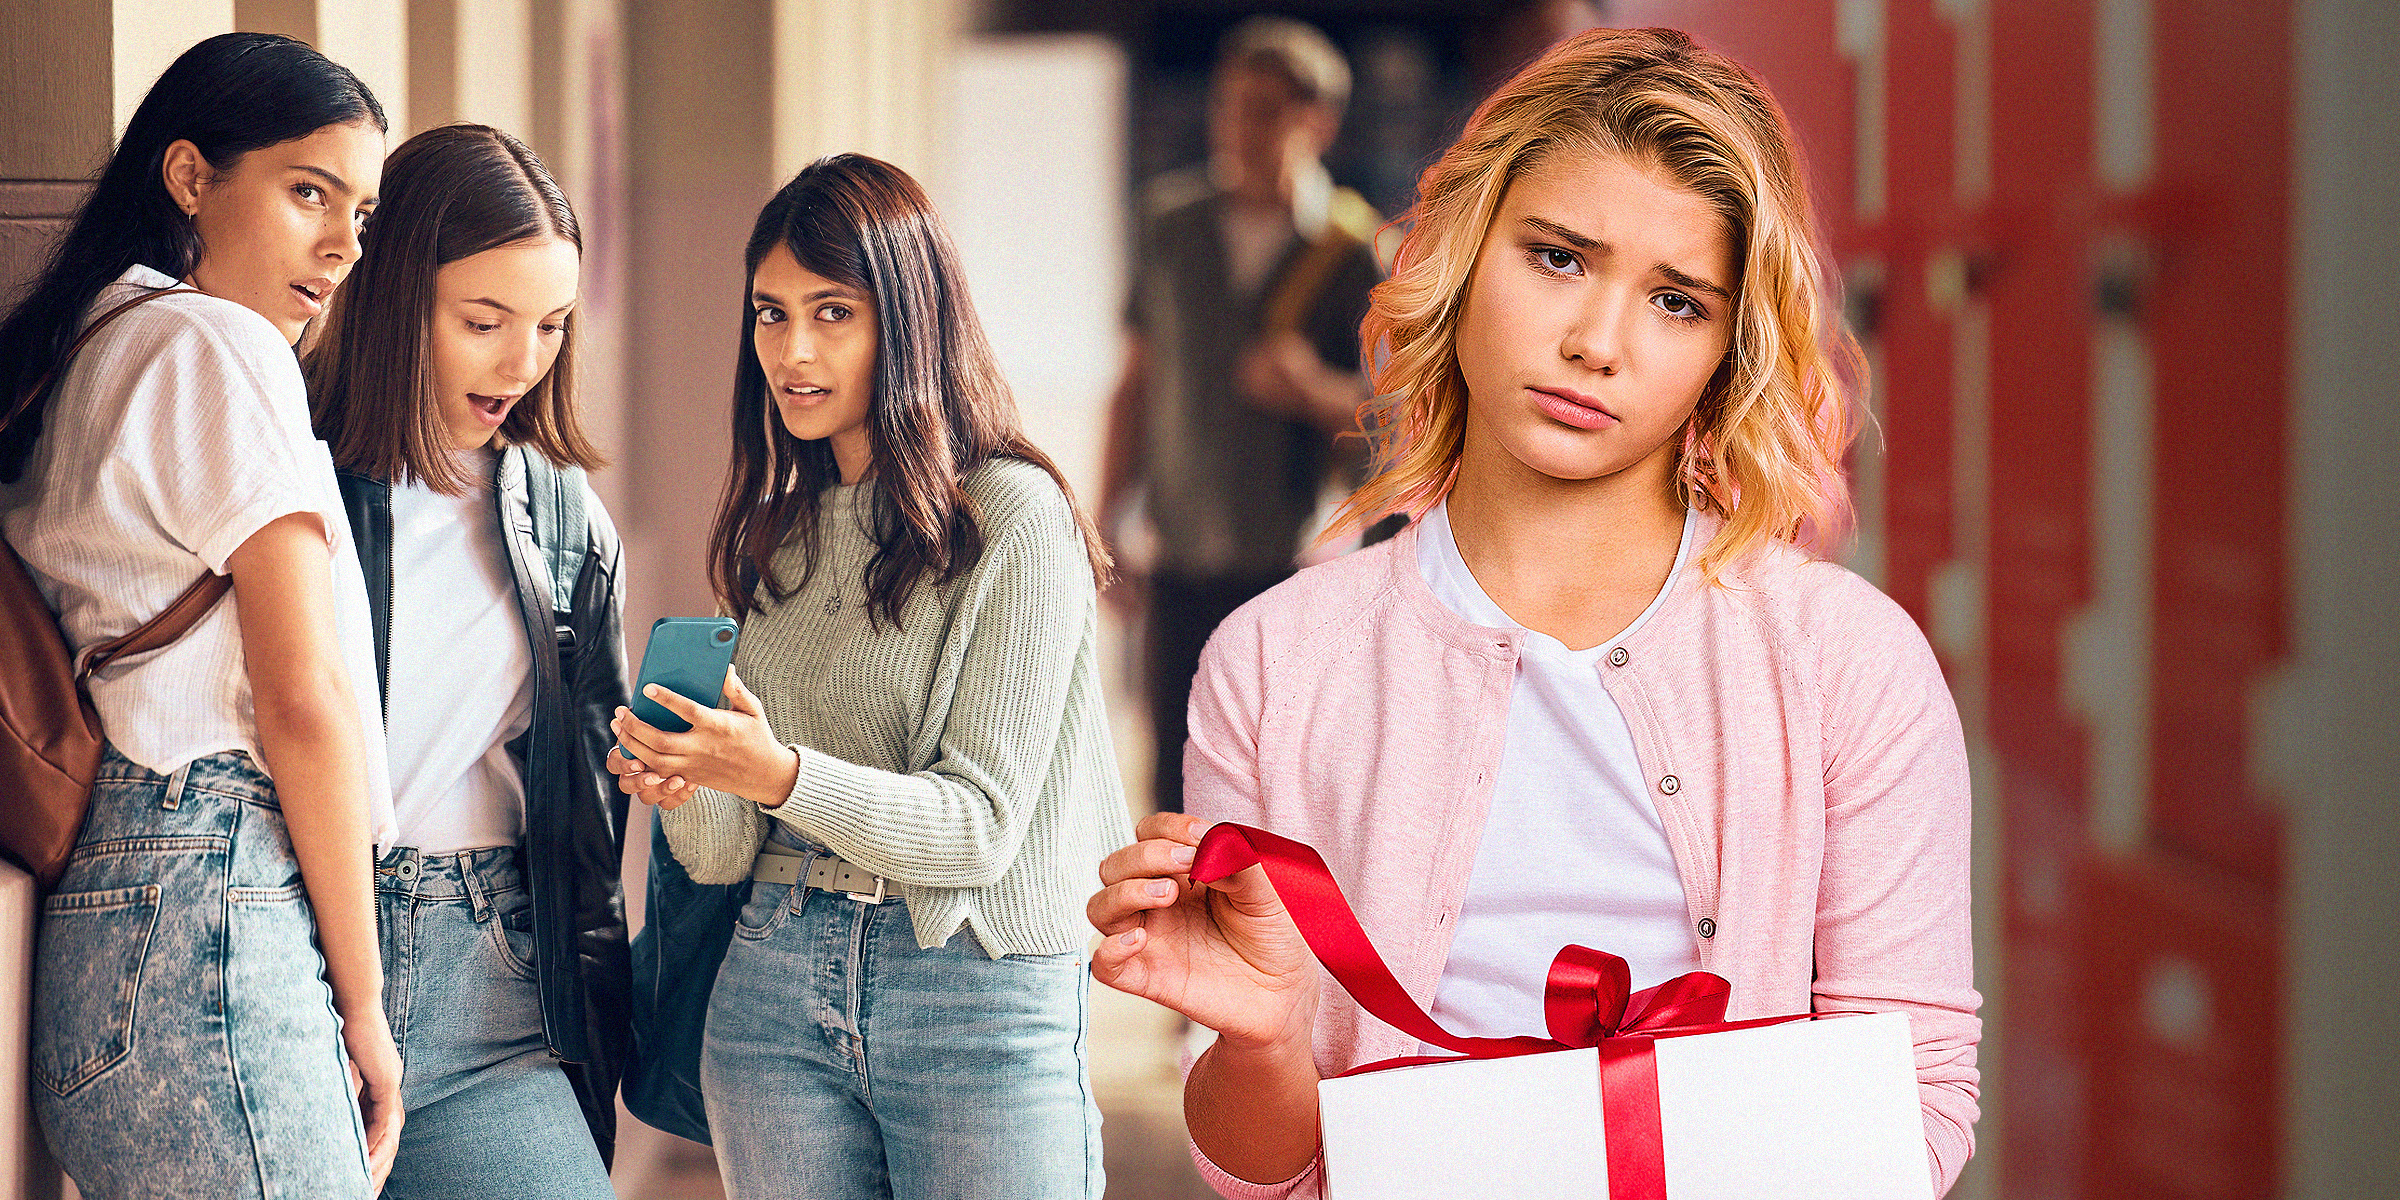 Three girls looking at a phone surprised and a girl opening a gift | Source: Shutterstock